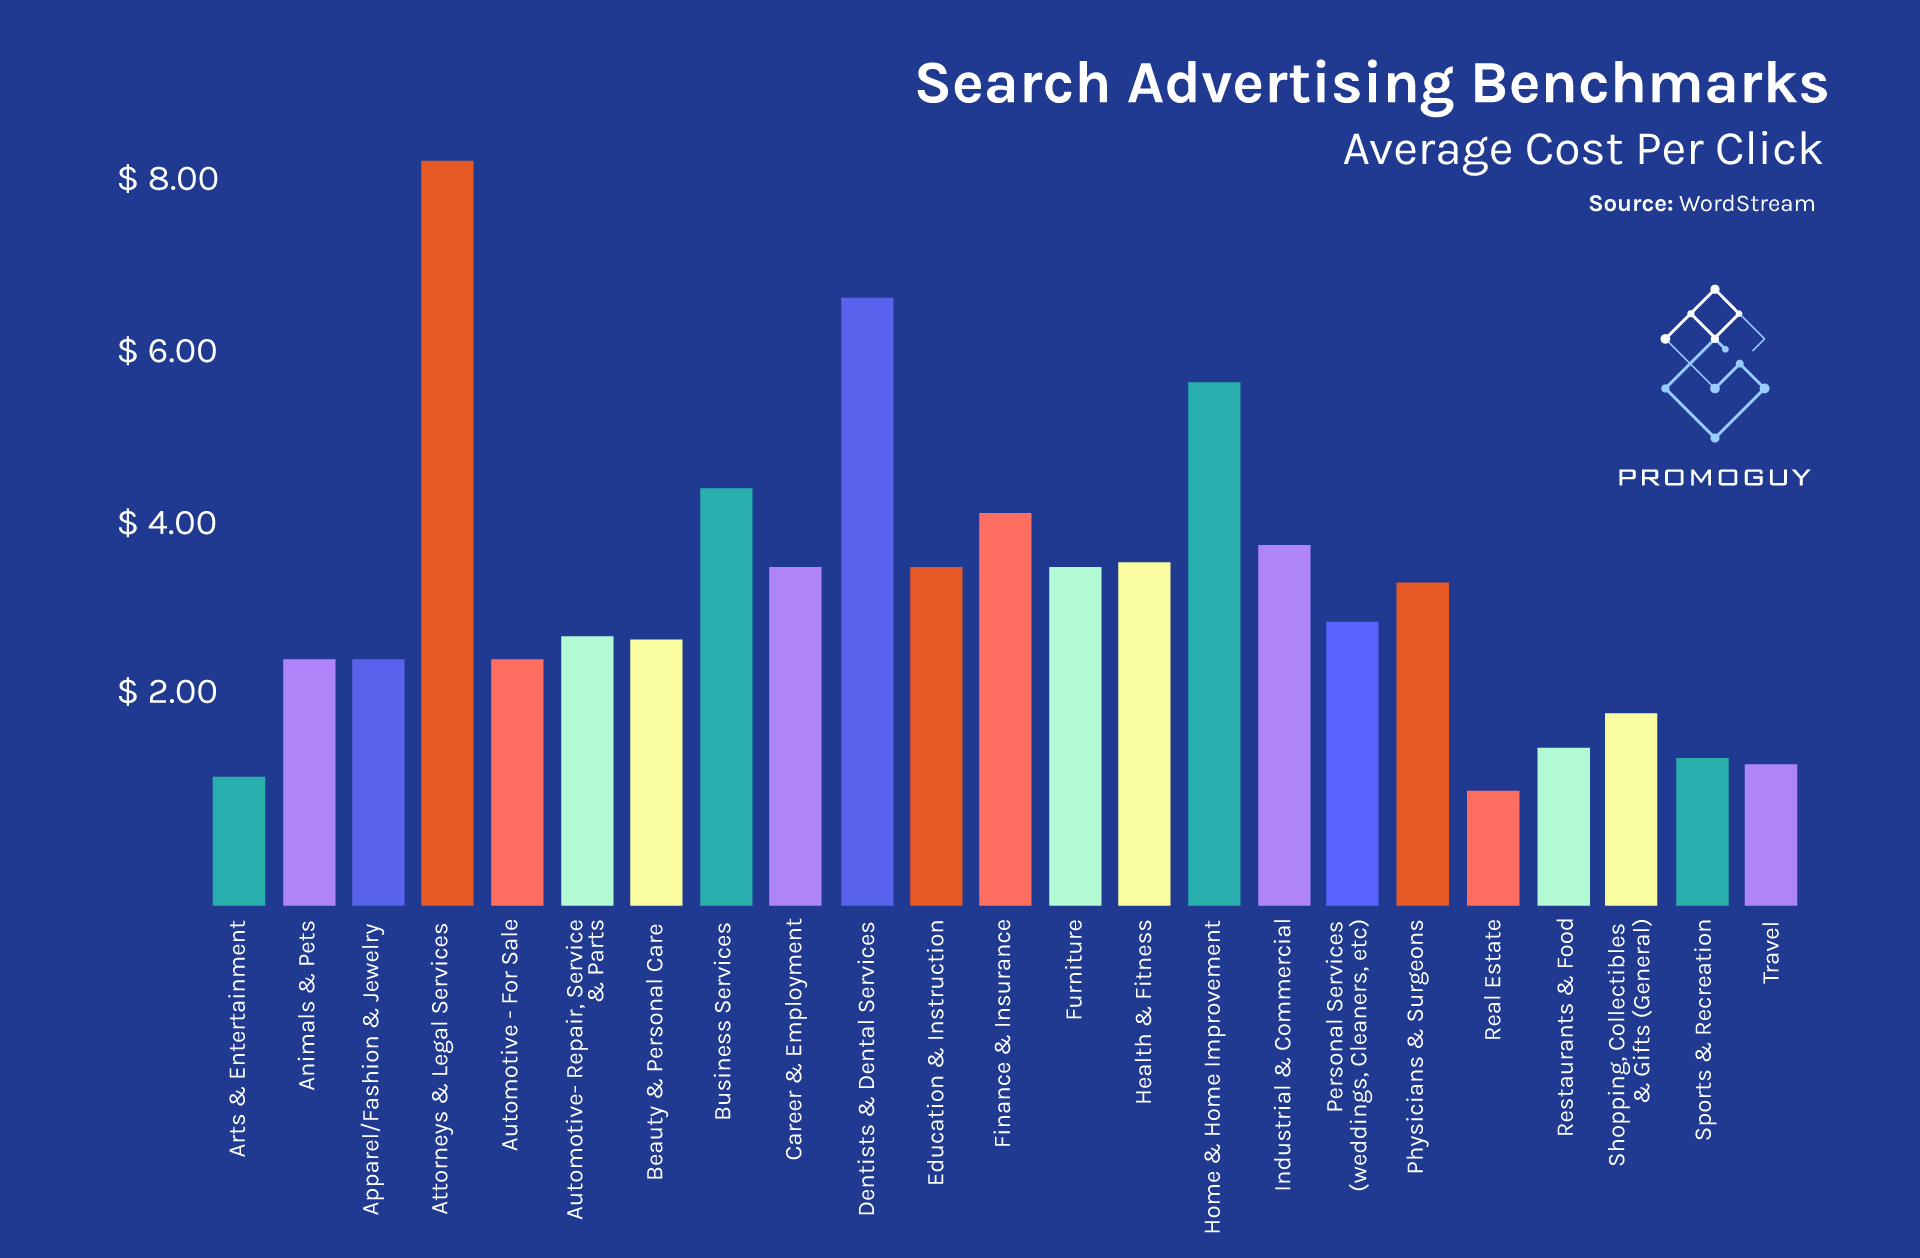 Search Advertising Benchmark Trends